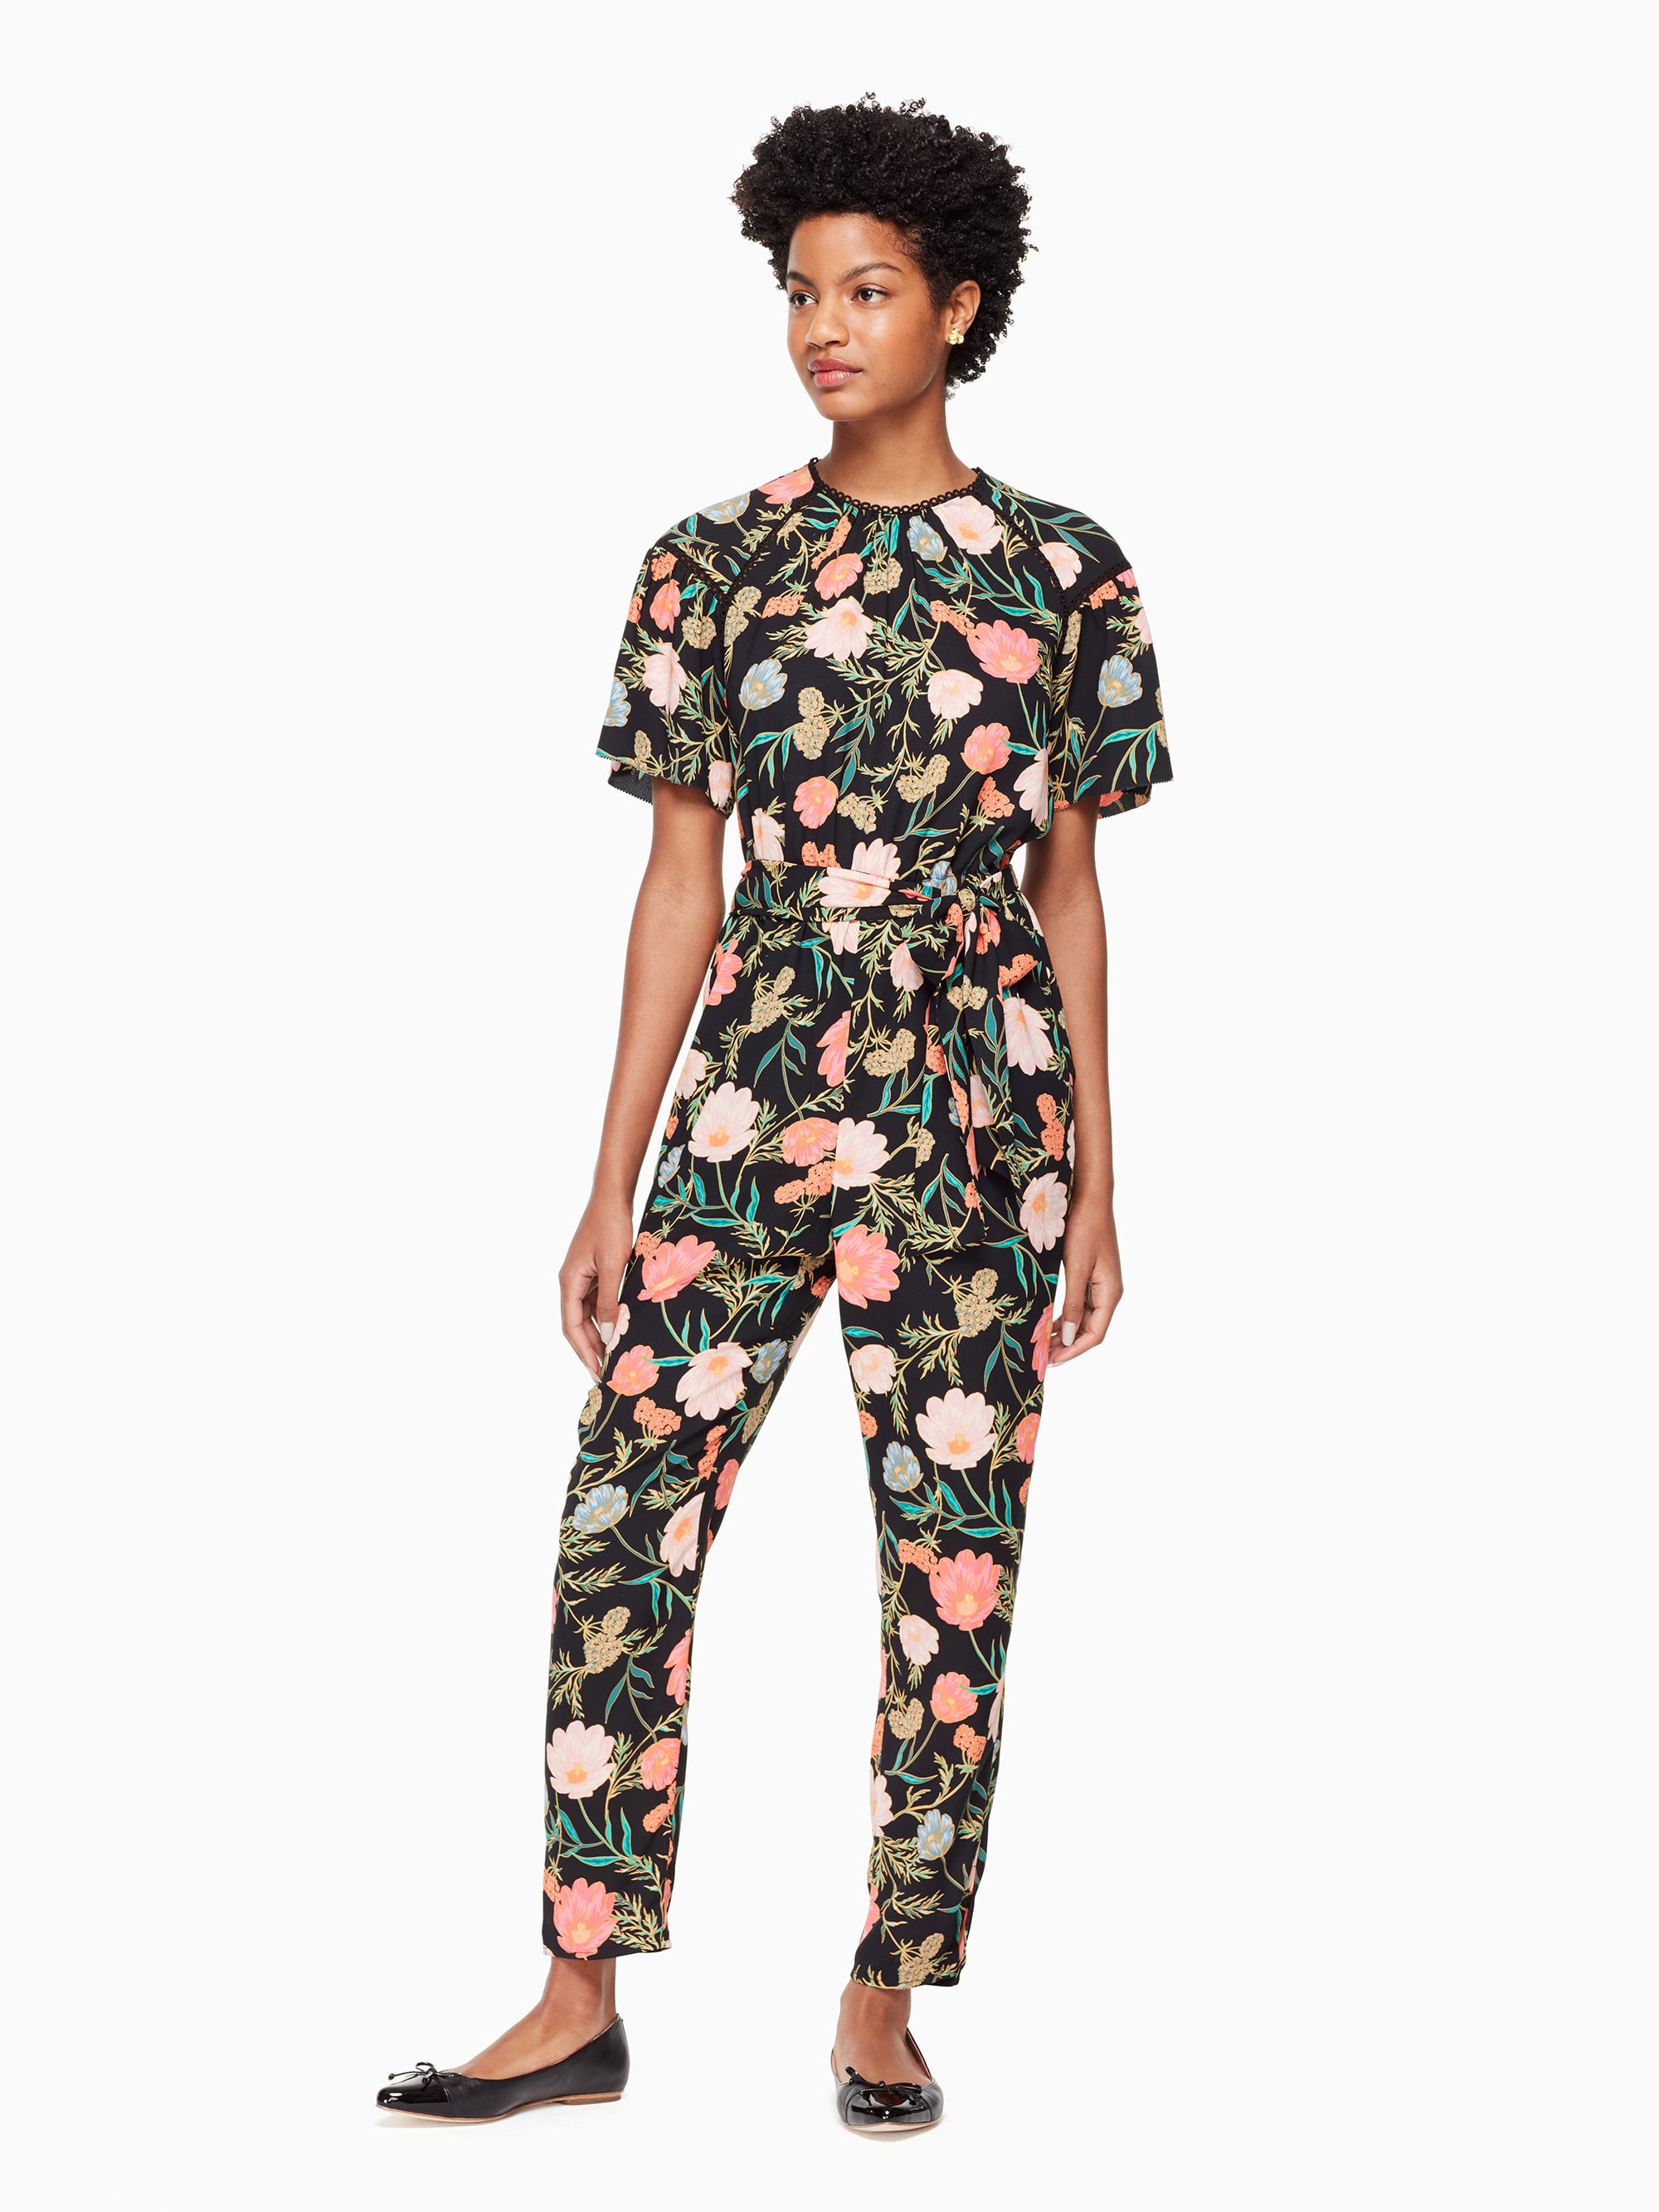 Kate Spade New York Blossom Jumpsuit | We Didn't Get Invited to Gwyneth  Paltrow's Bachelorette Party, So We're Going to Copy Her Jumpsuit as  Revenge | POPSUGAR Fashion Photo 13